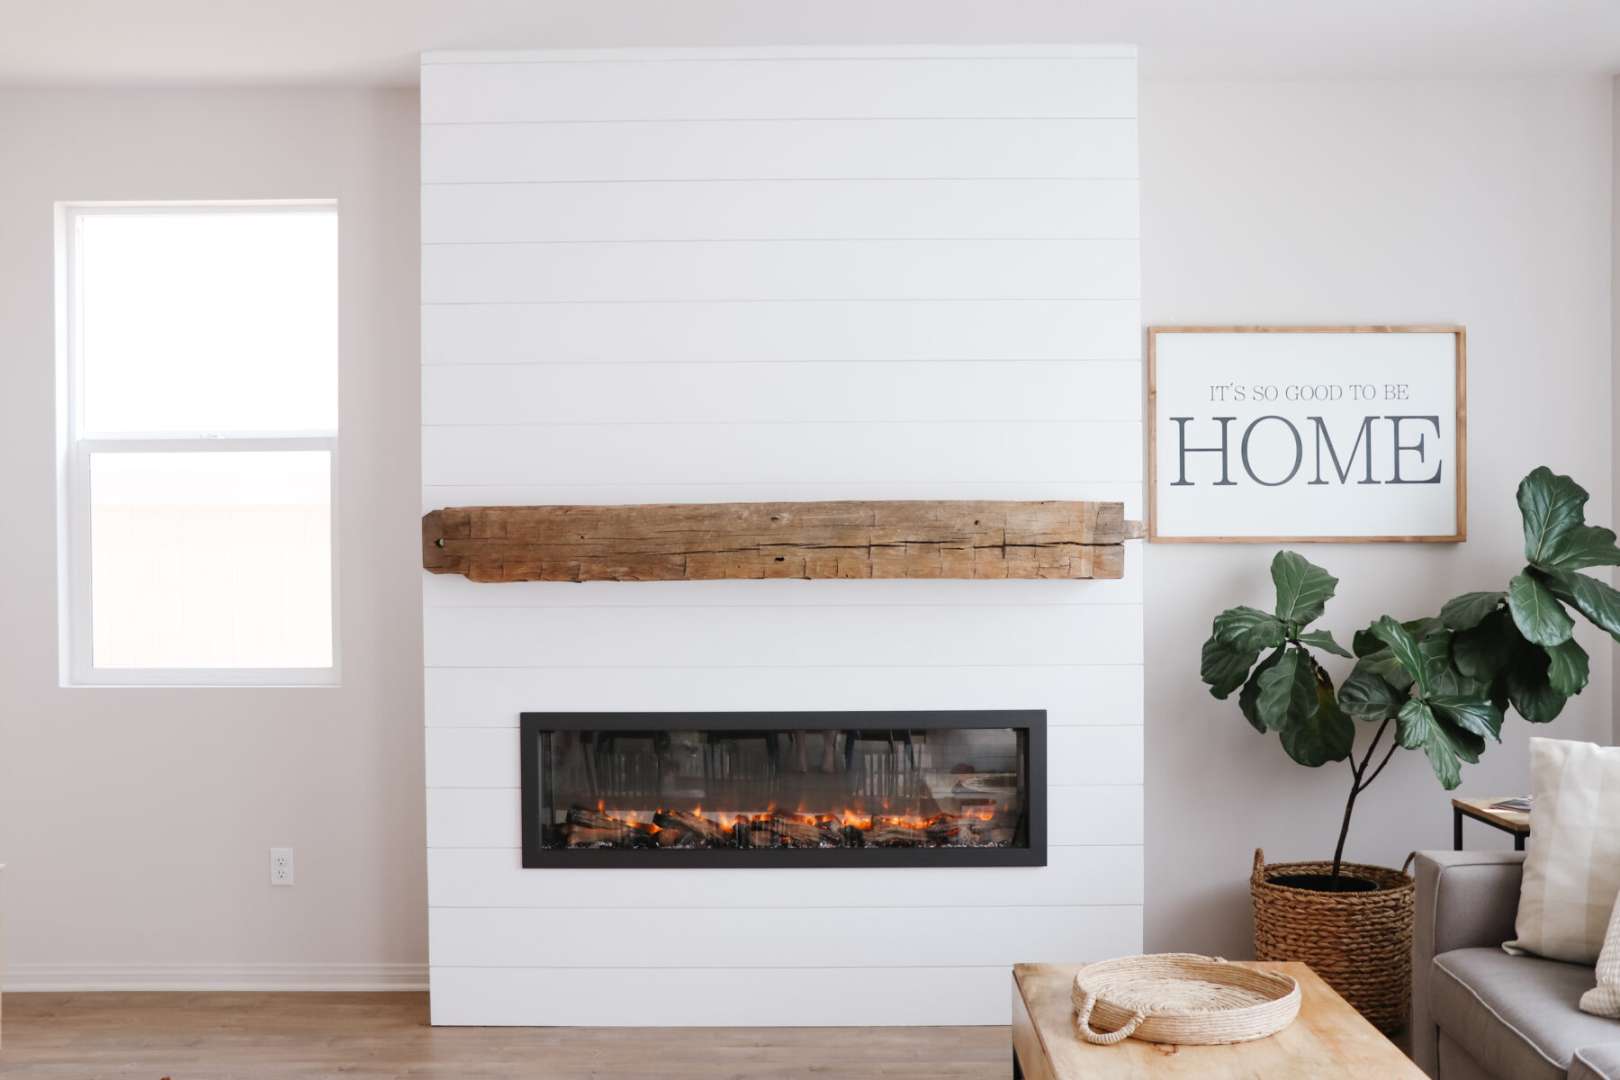 DIY Shiplap Electric Fireplace Build with Mantel – Healthy Grocery